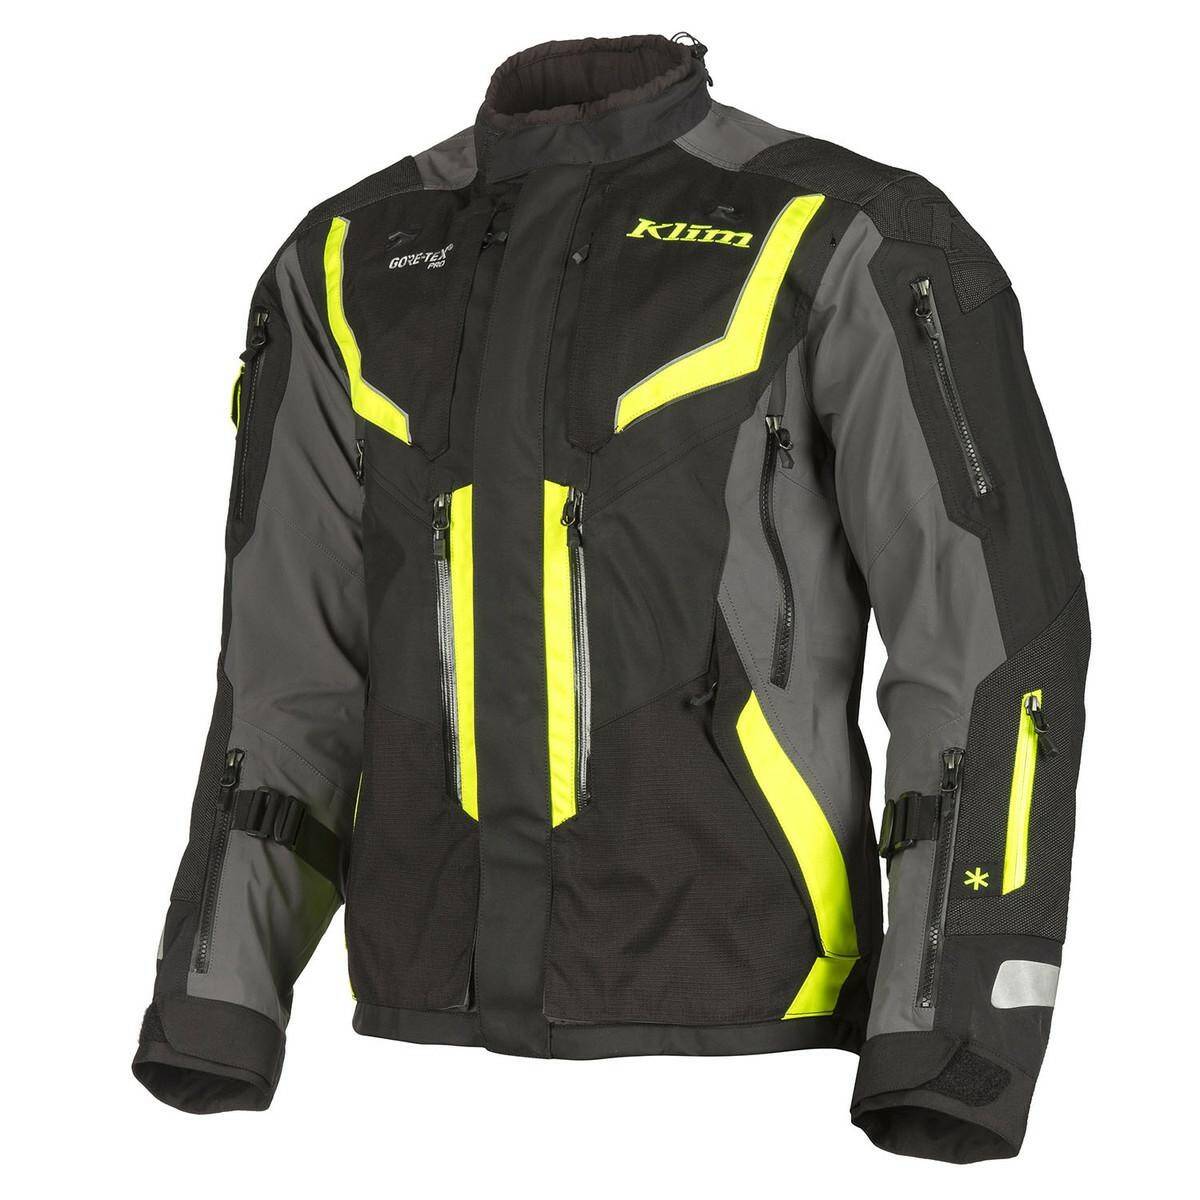 GORE-TEX motorcycle jackets